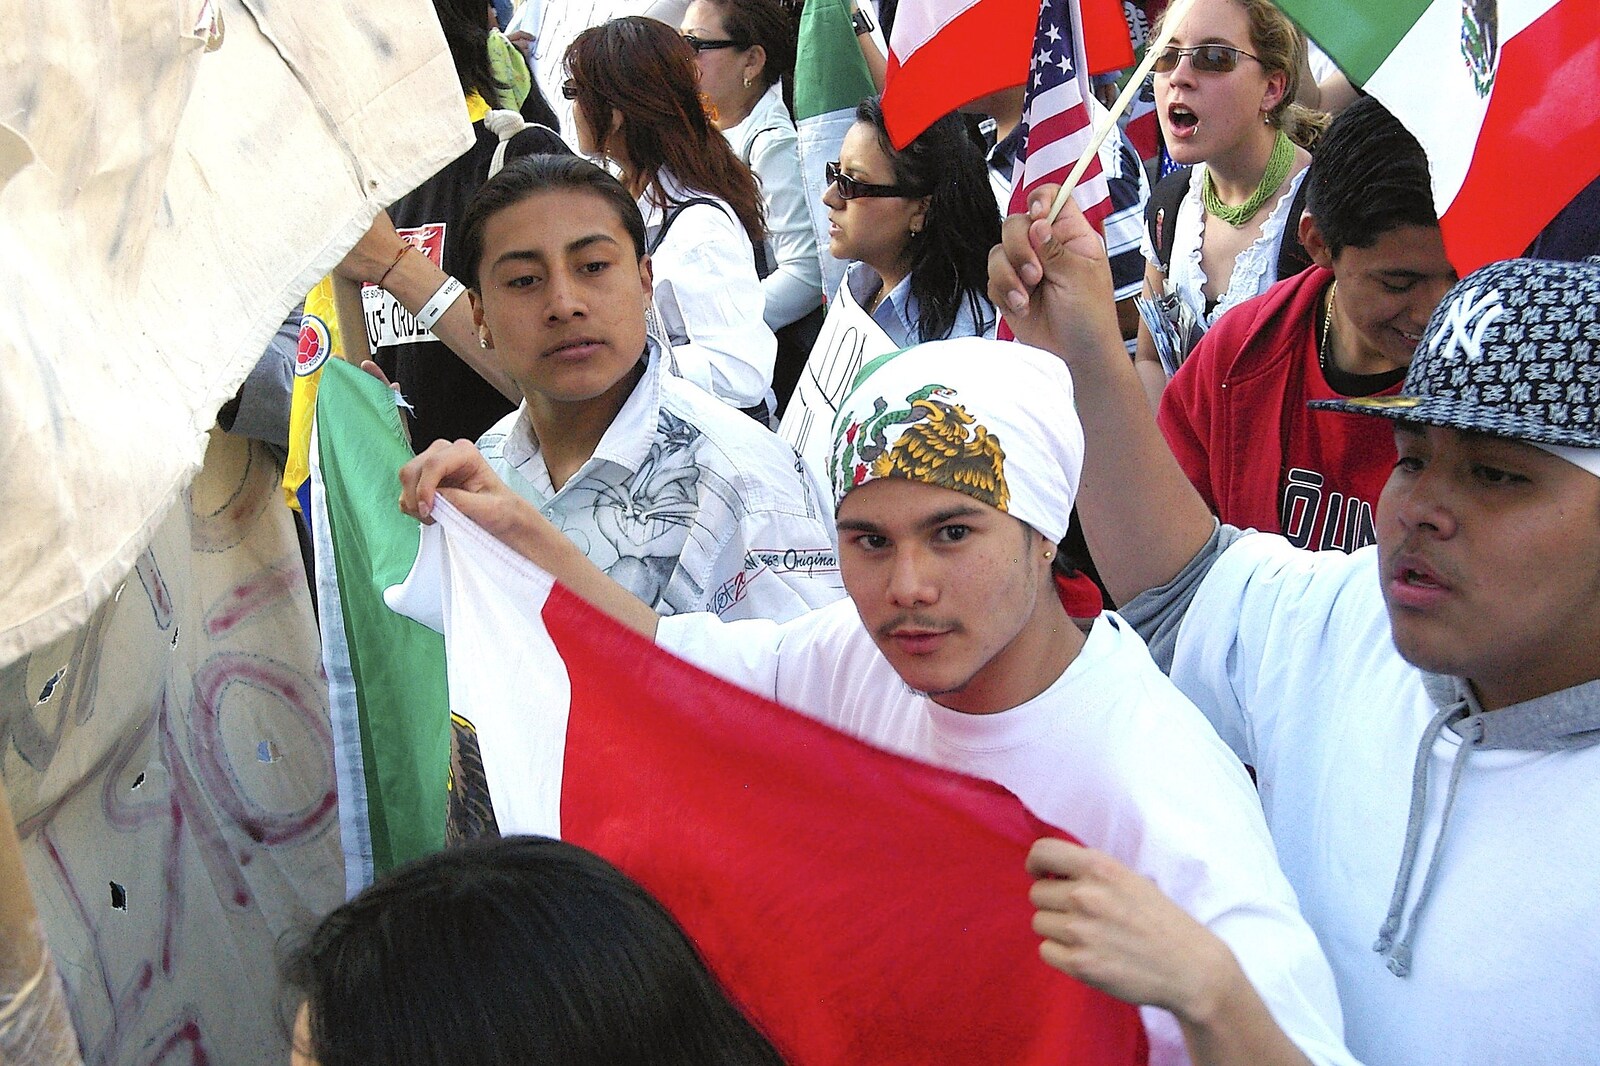 A young Mexican looks up from A Union Square Demo, Bryant Park and Columbus Circle, New York, US - 2nd May 2006